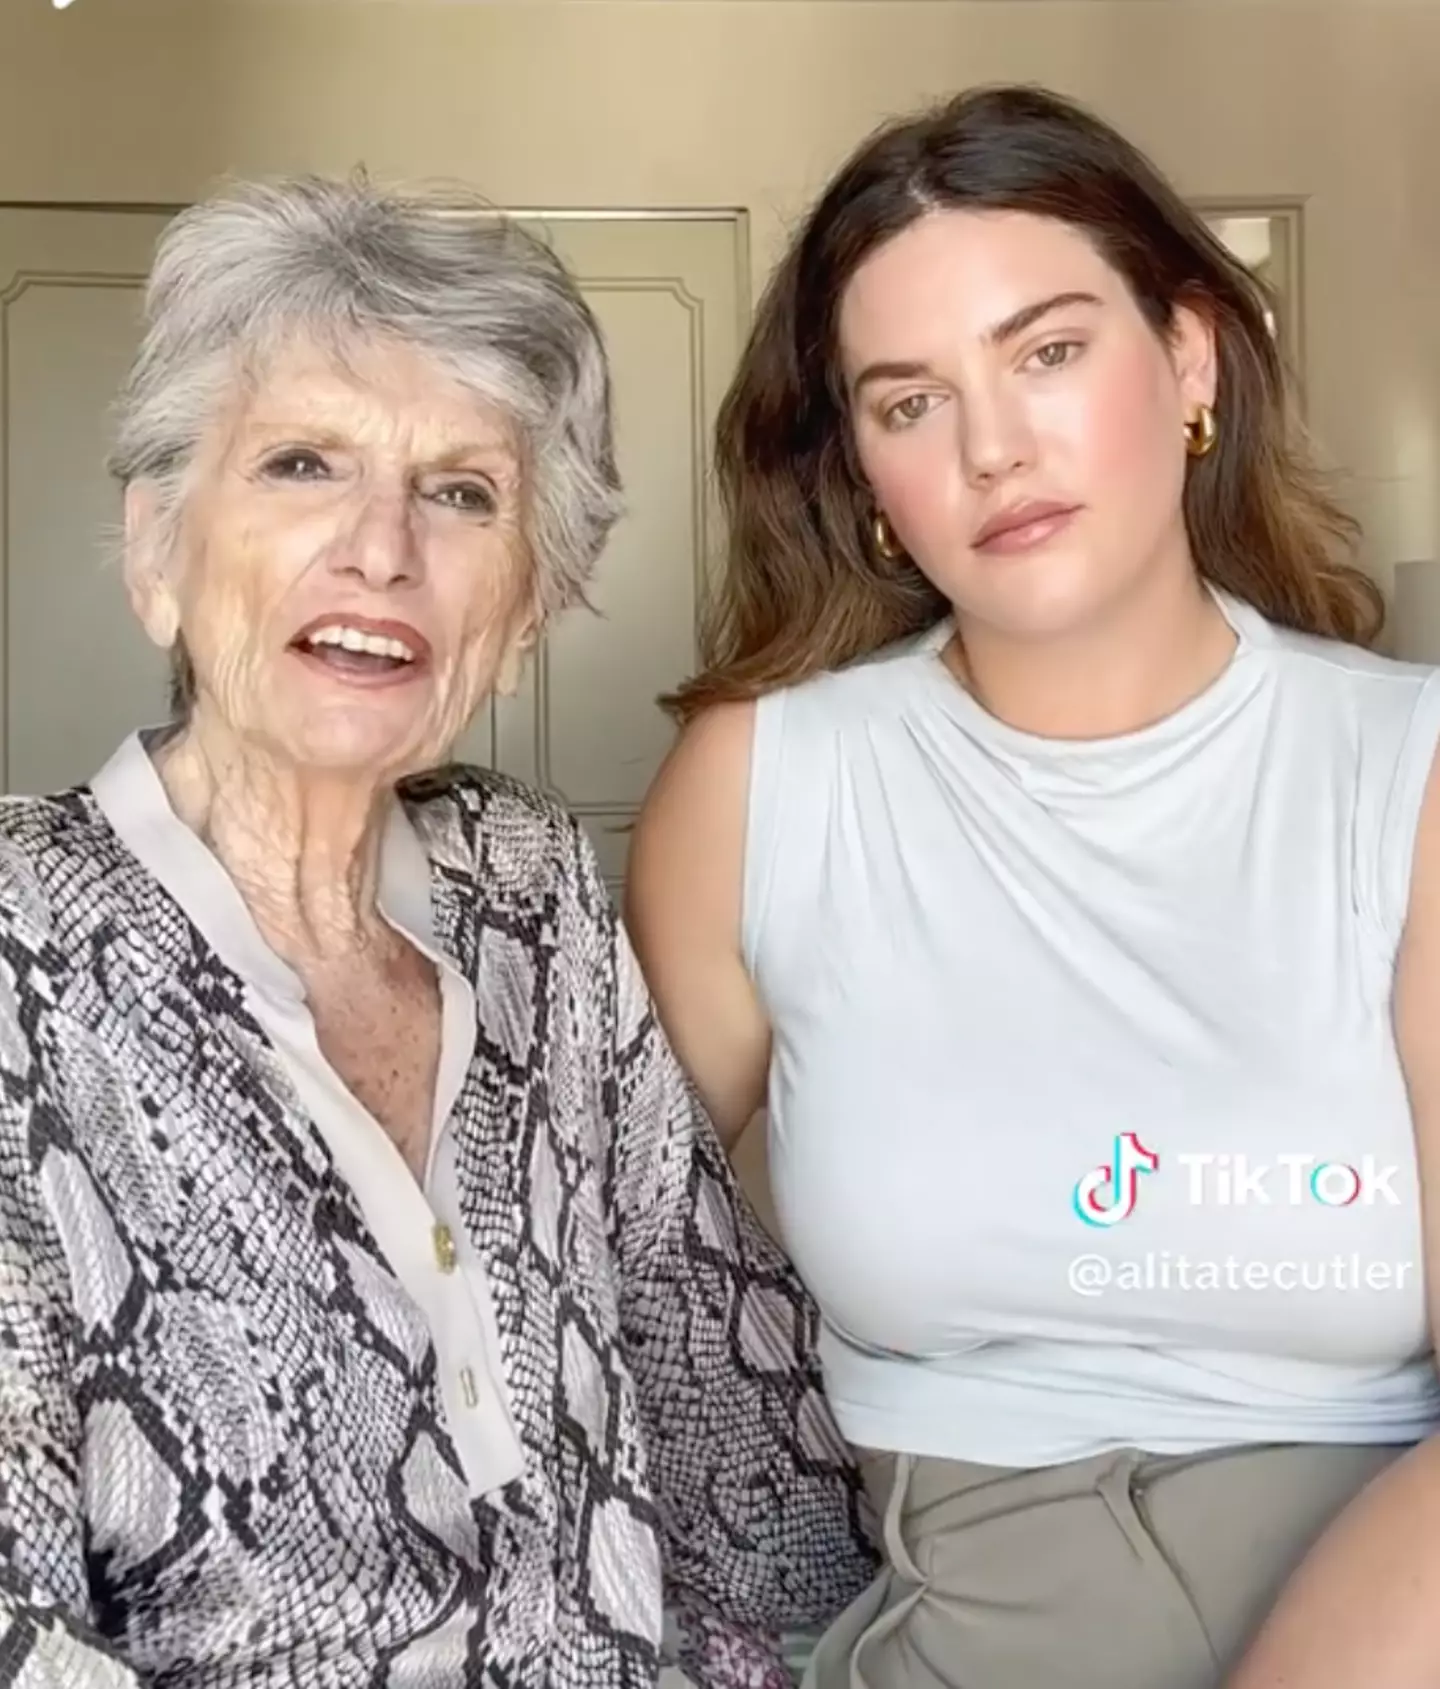 The model's grandmother has opted for euthanasia after receiving a terminal diagnosis.